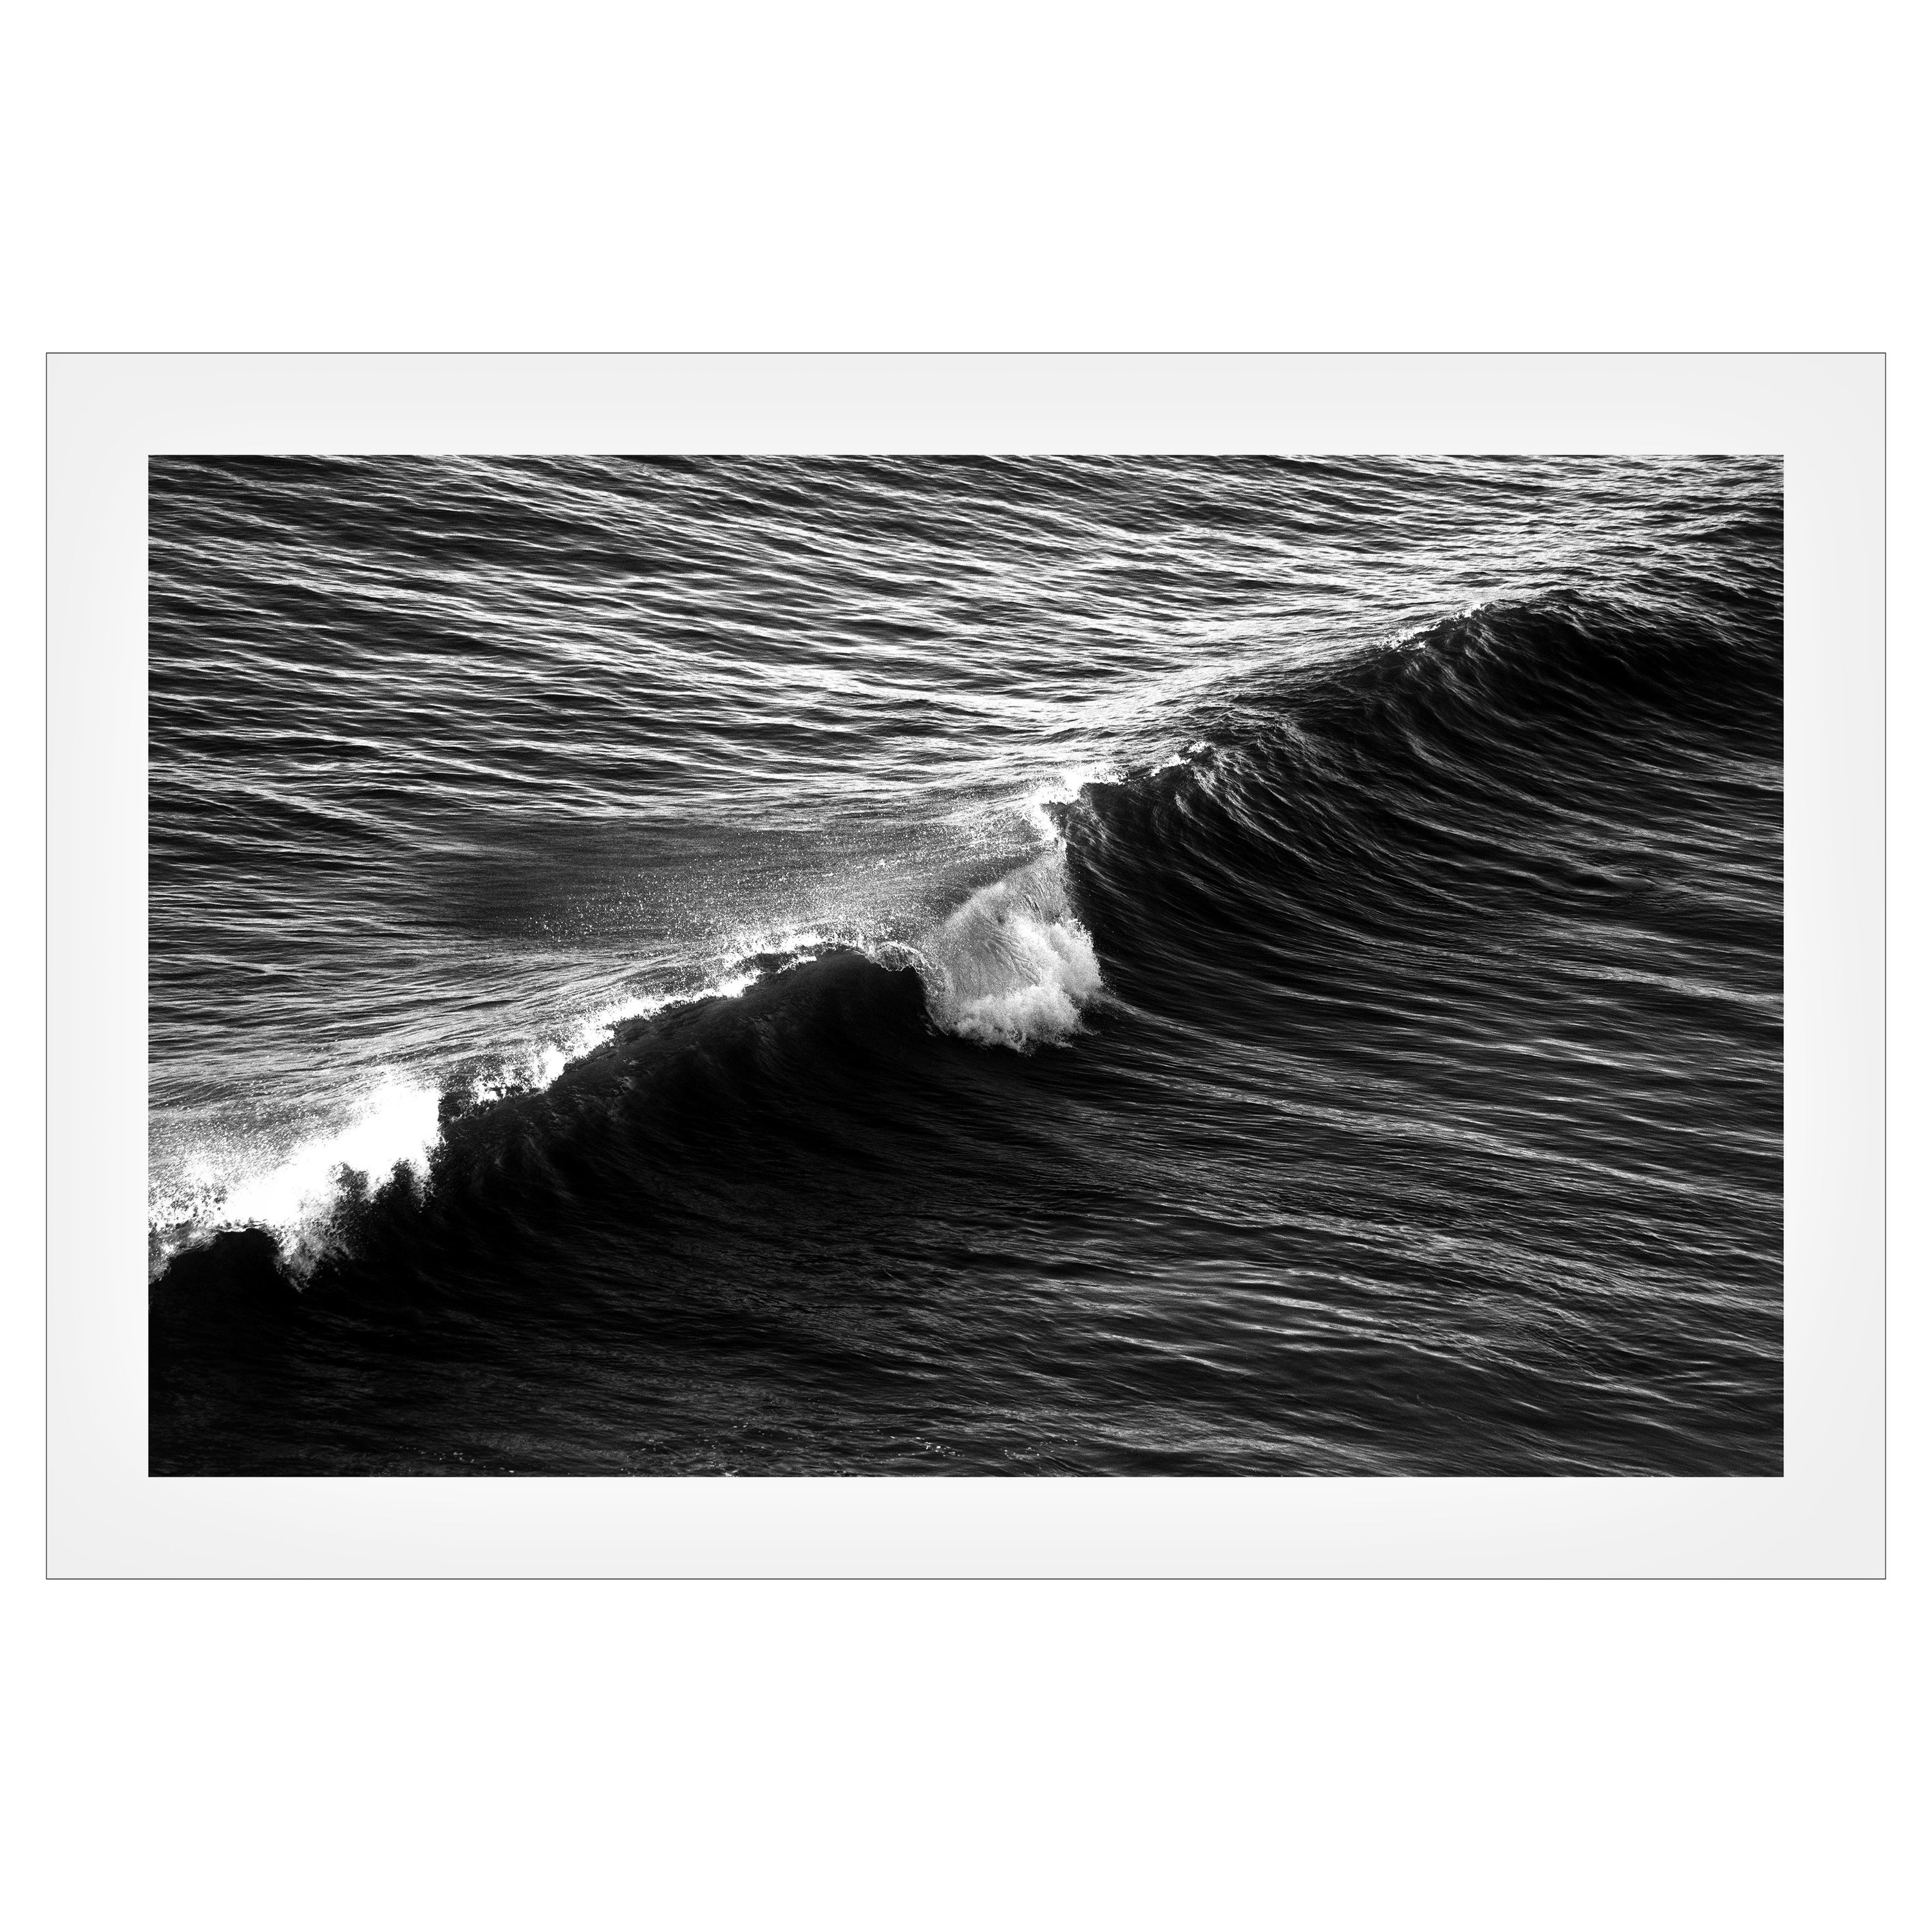 Kind of Cyan Black and White Photograph - Long Wave in Venice Beach, Black and White Giclée Print on Matte Cotton Paper  